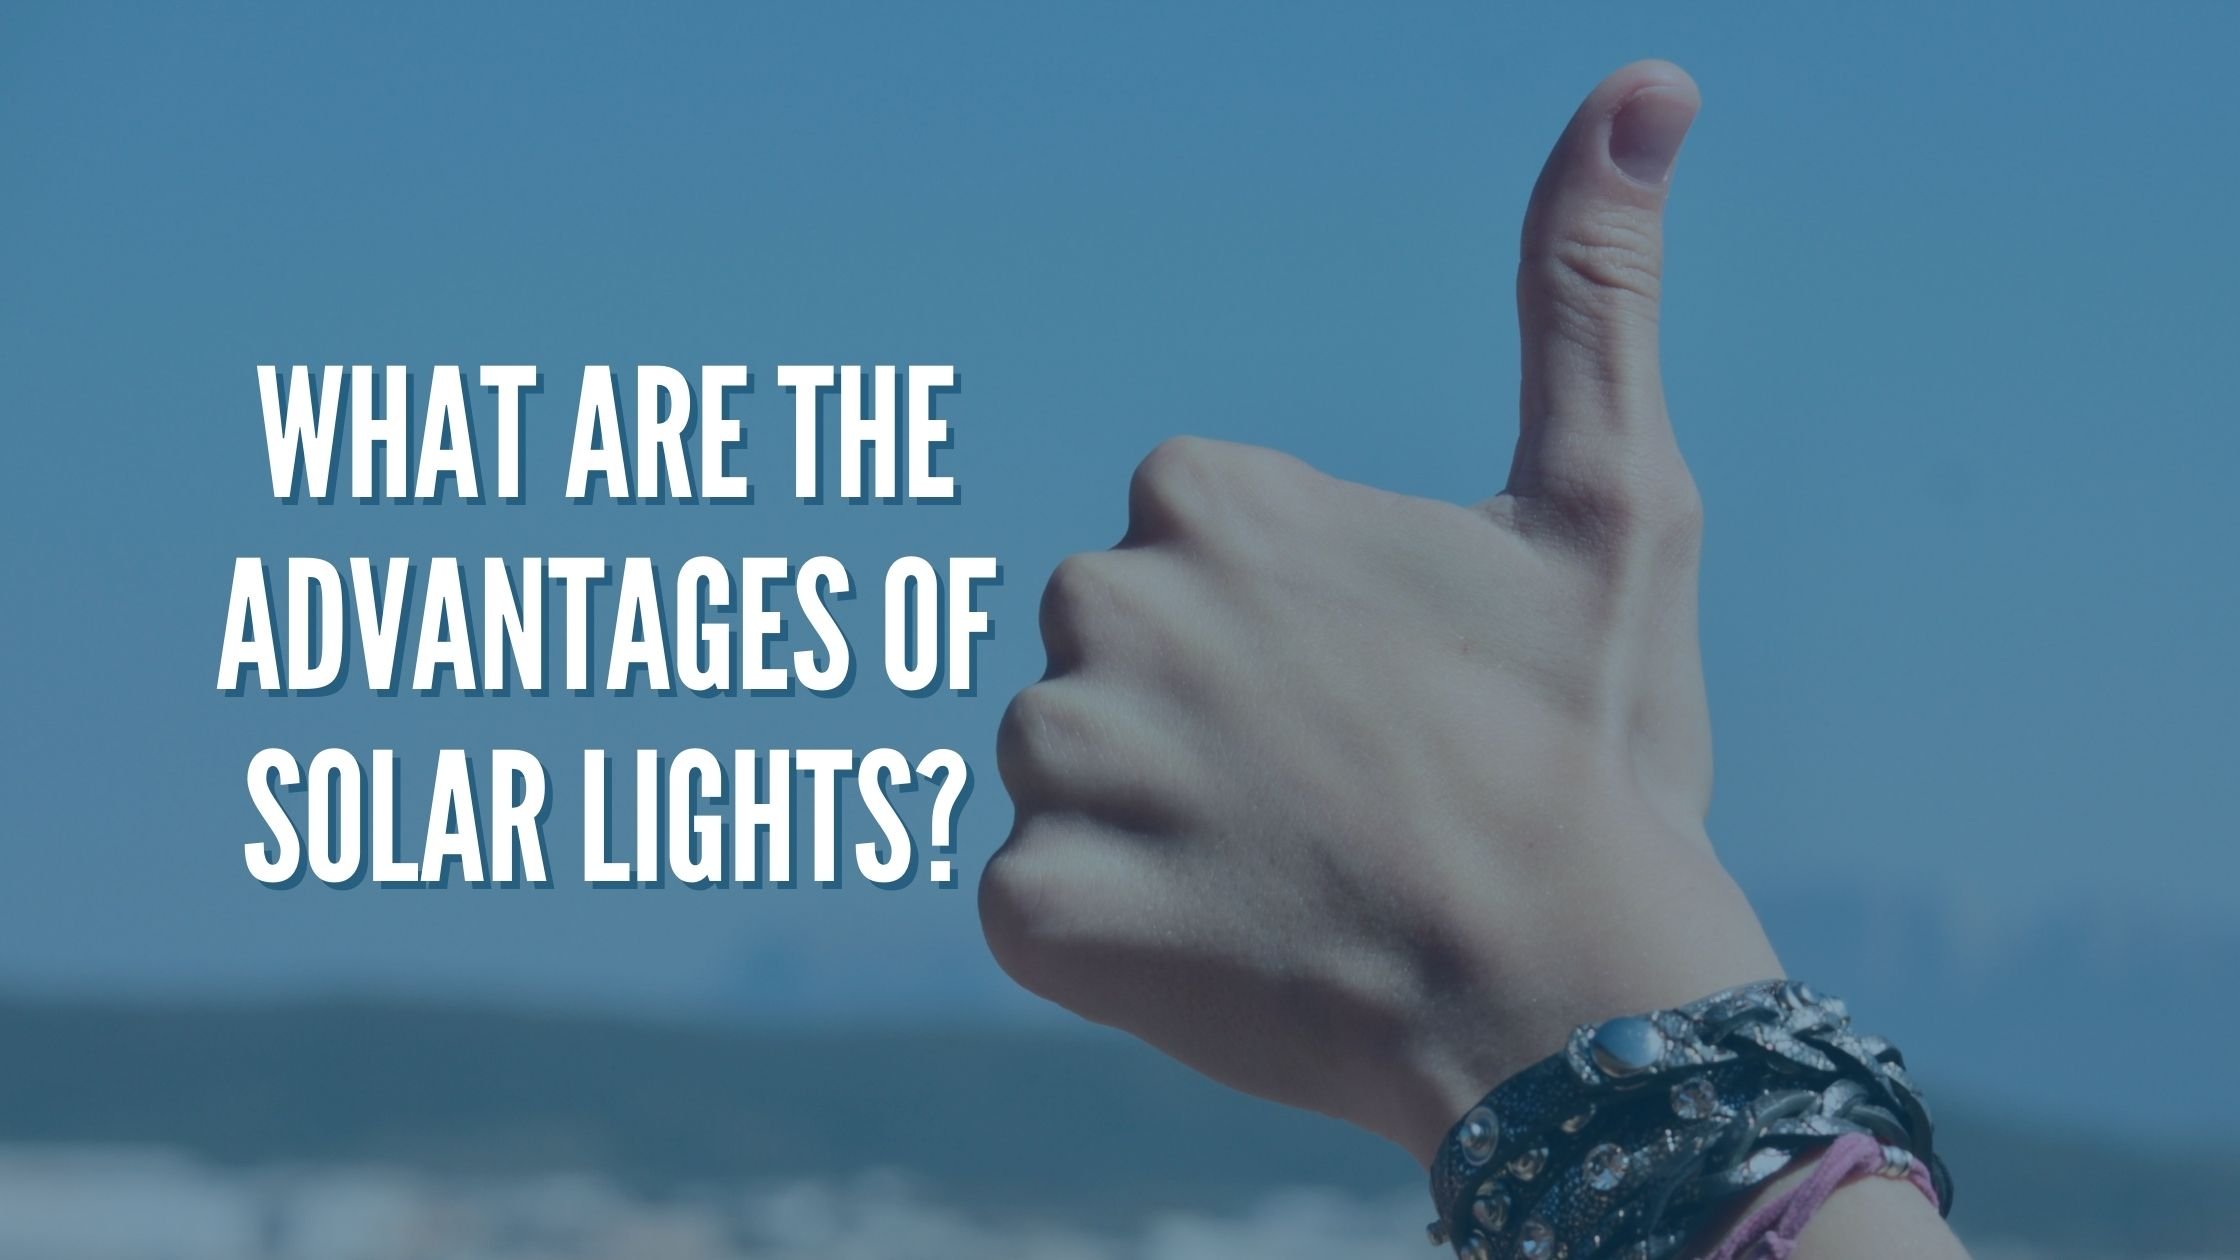 What Are the Advantages of Solar Lights?